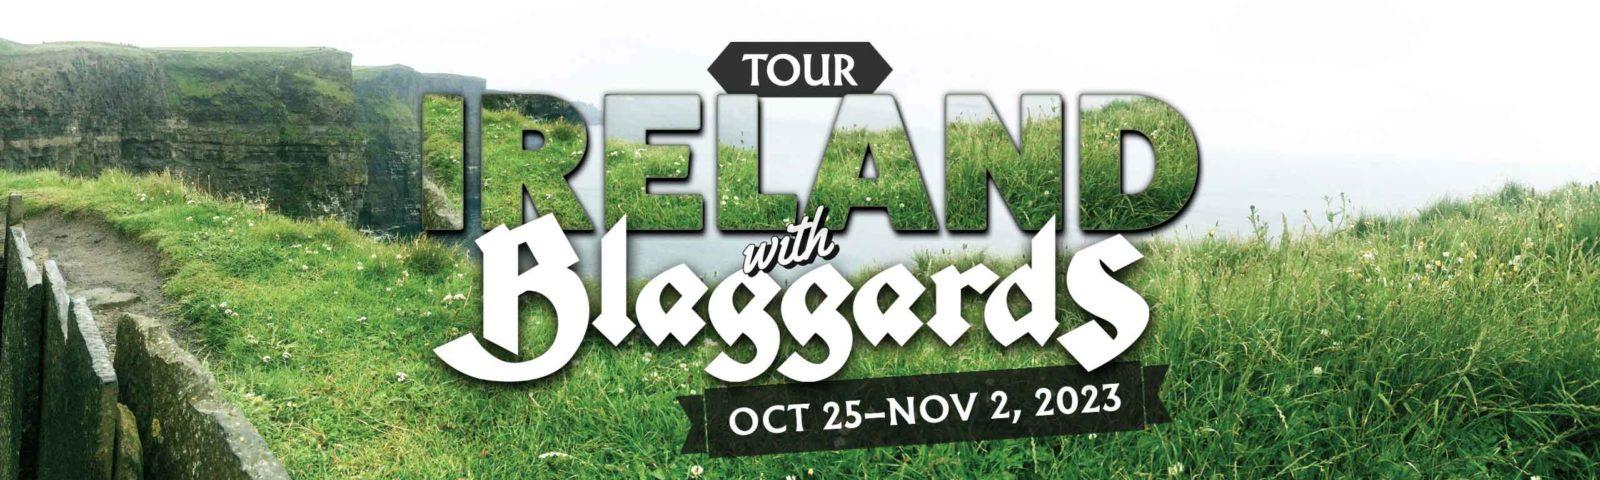 Tour IRELAND with Blaggards in Fall 2023